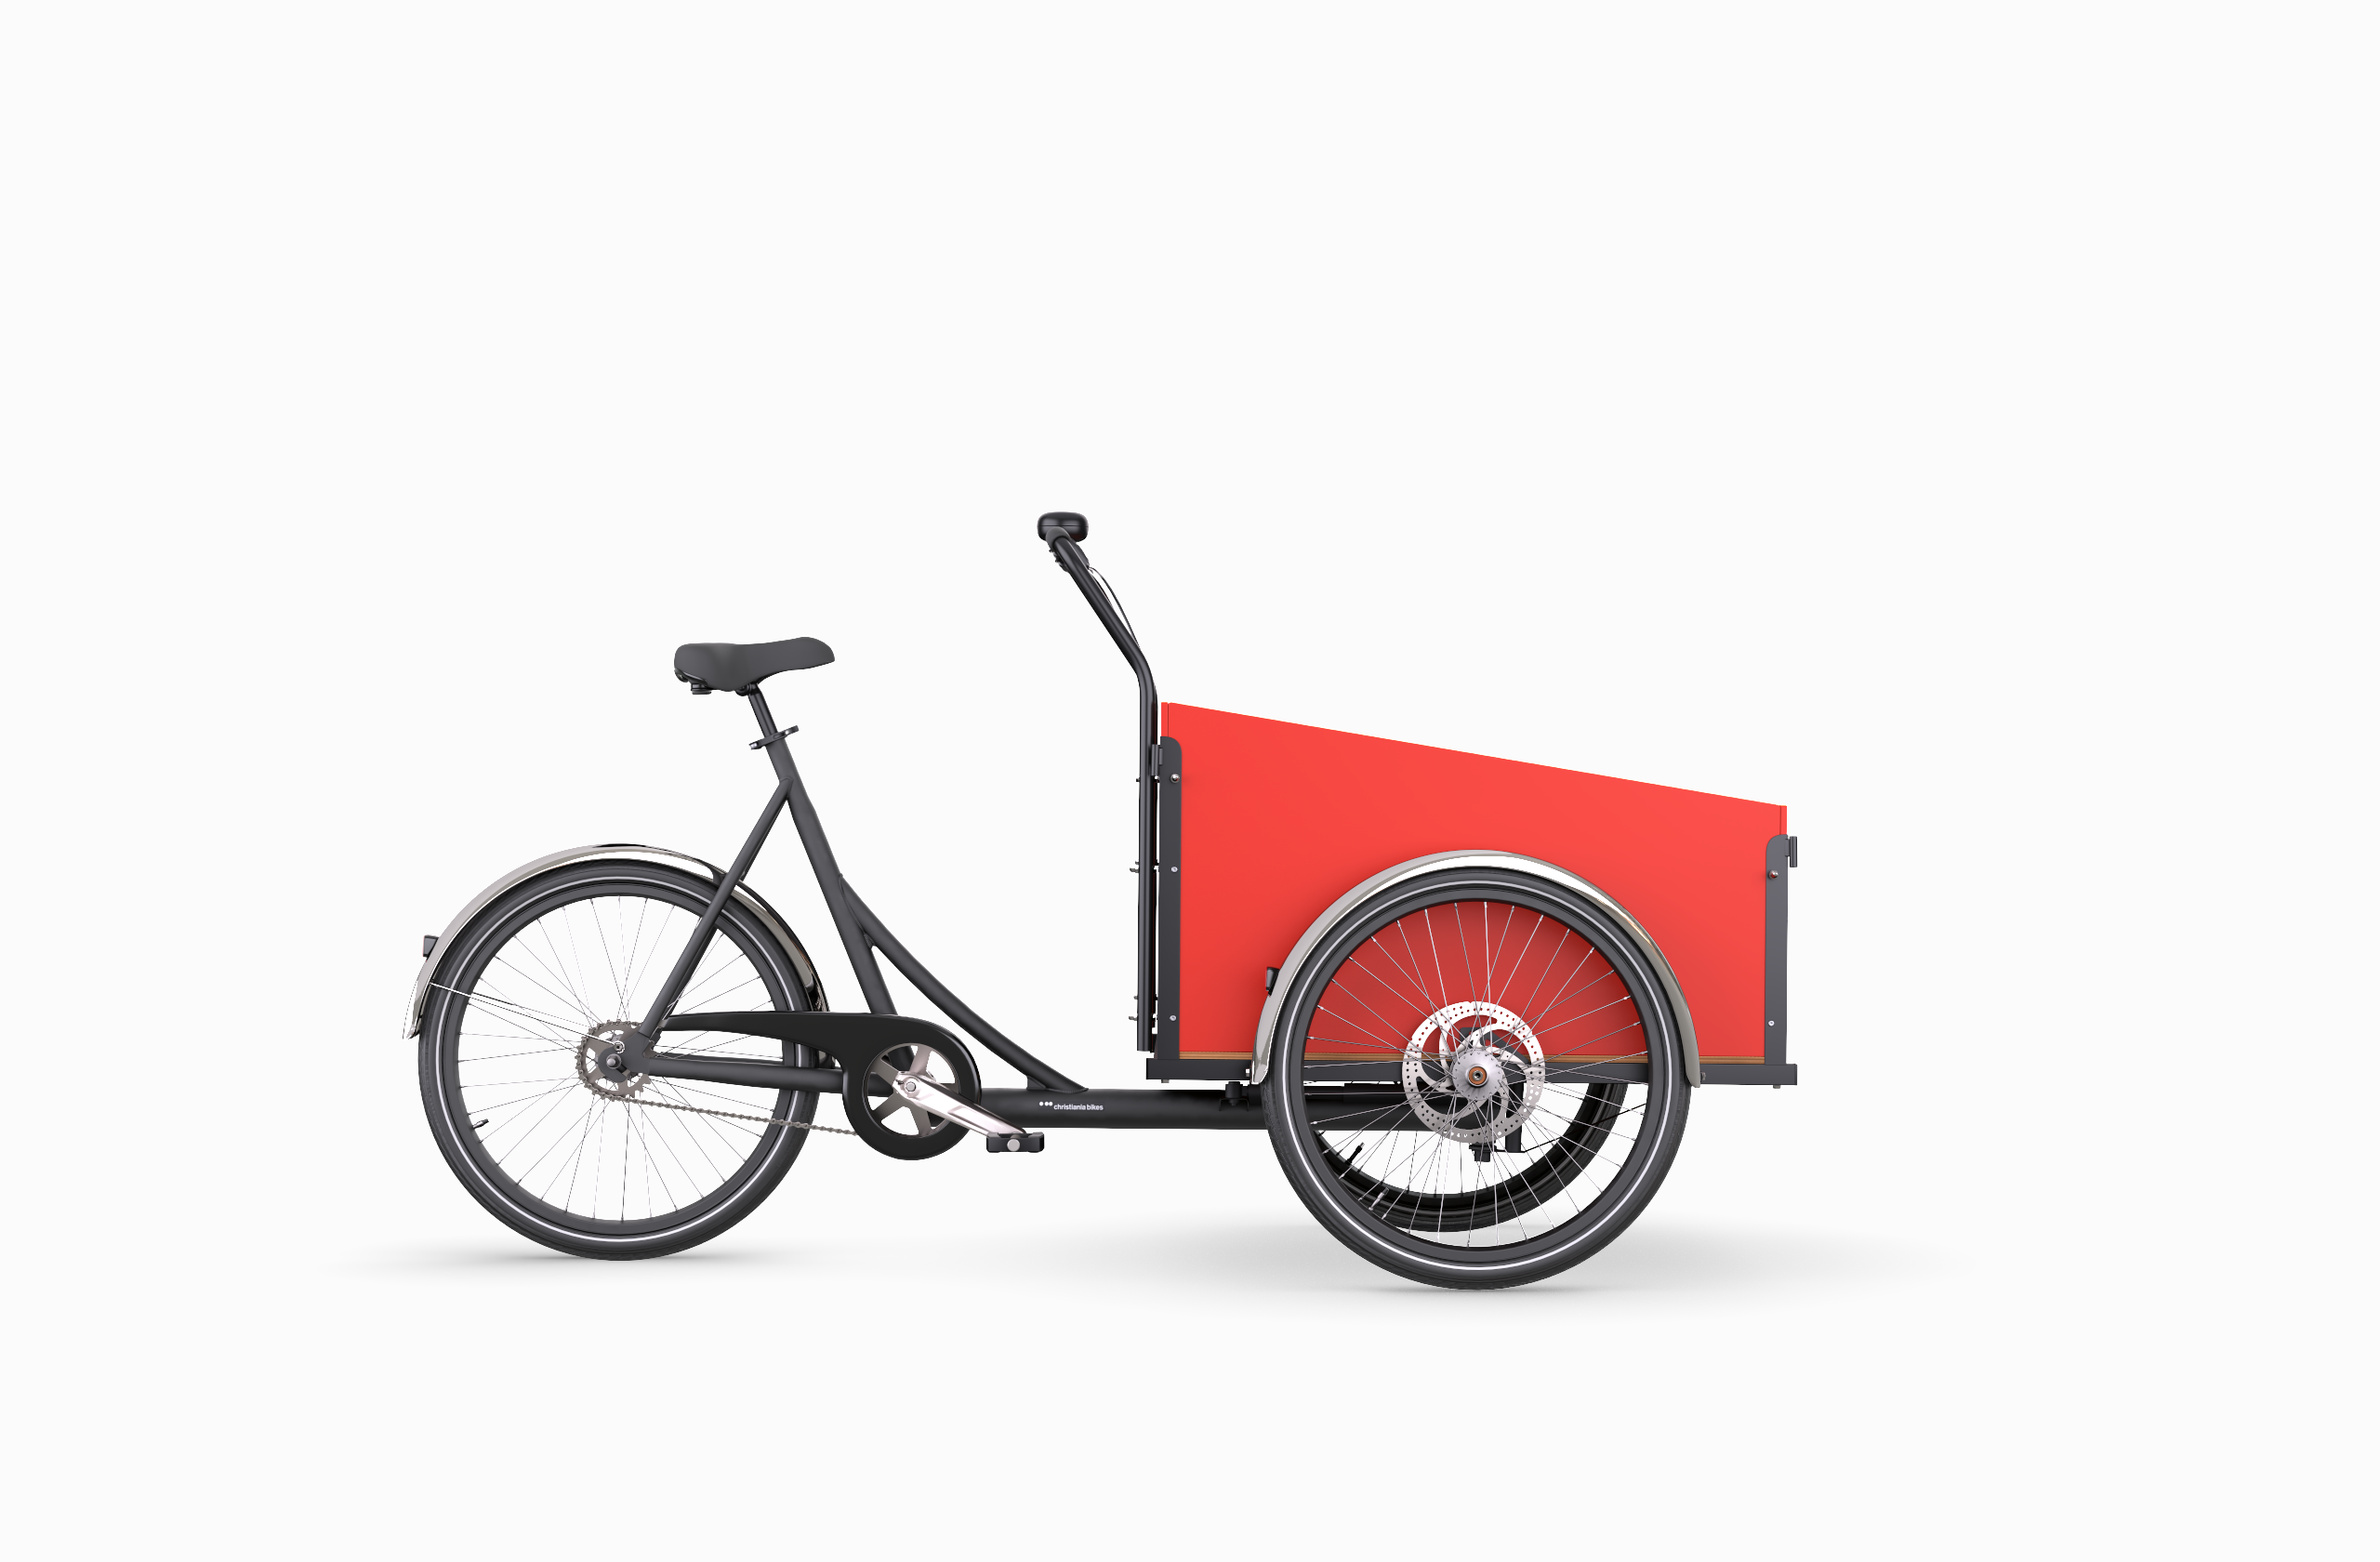 In STOCK! Classic Sloped, 8-speed, Red Box